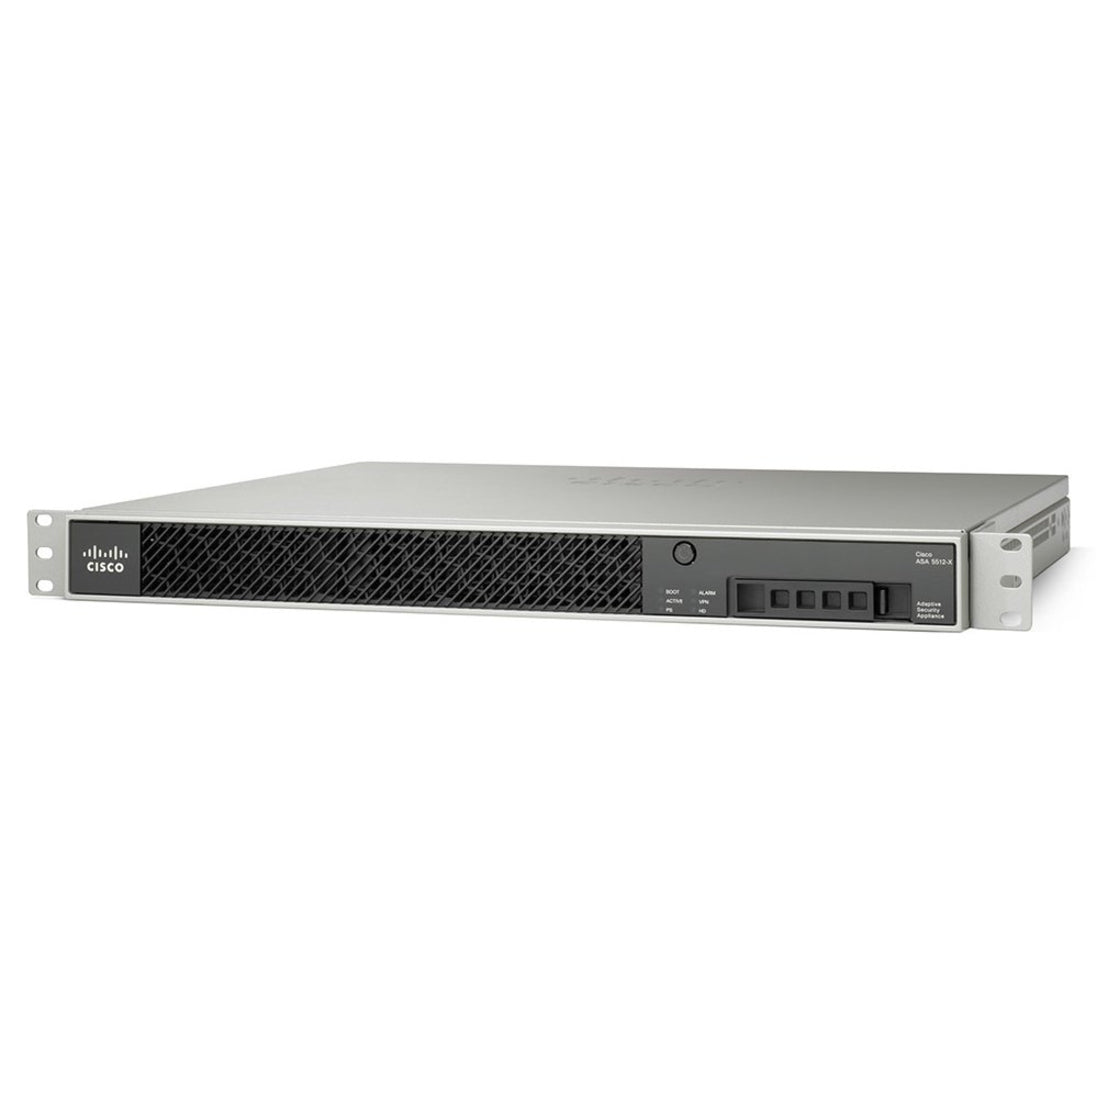 Cisco-IMSourcing ASA5512-X WITH SW 6GE 1GE DISC PROD SPCL SOURCING SEE NOTES (ASA5512-K9)